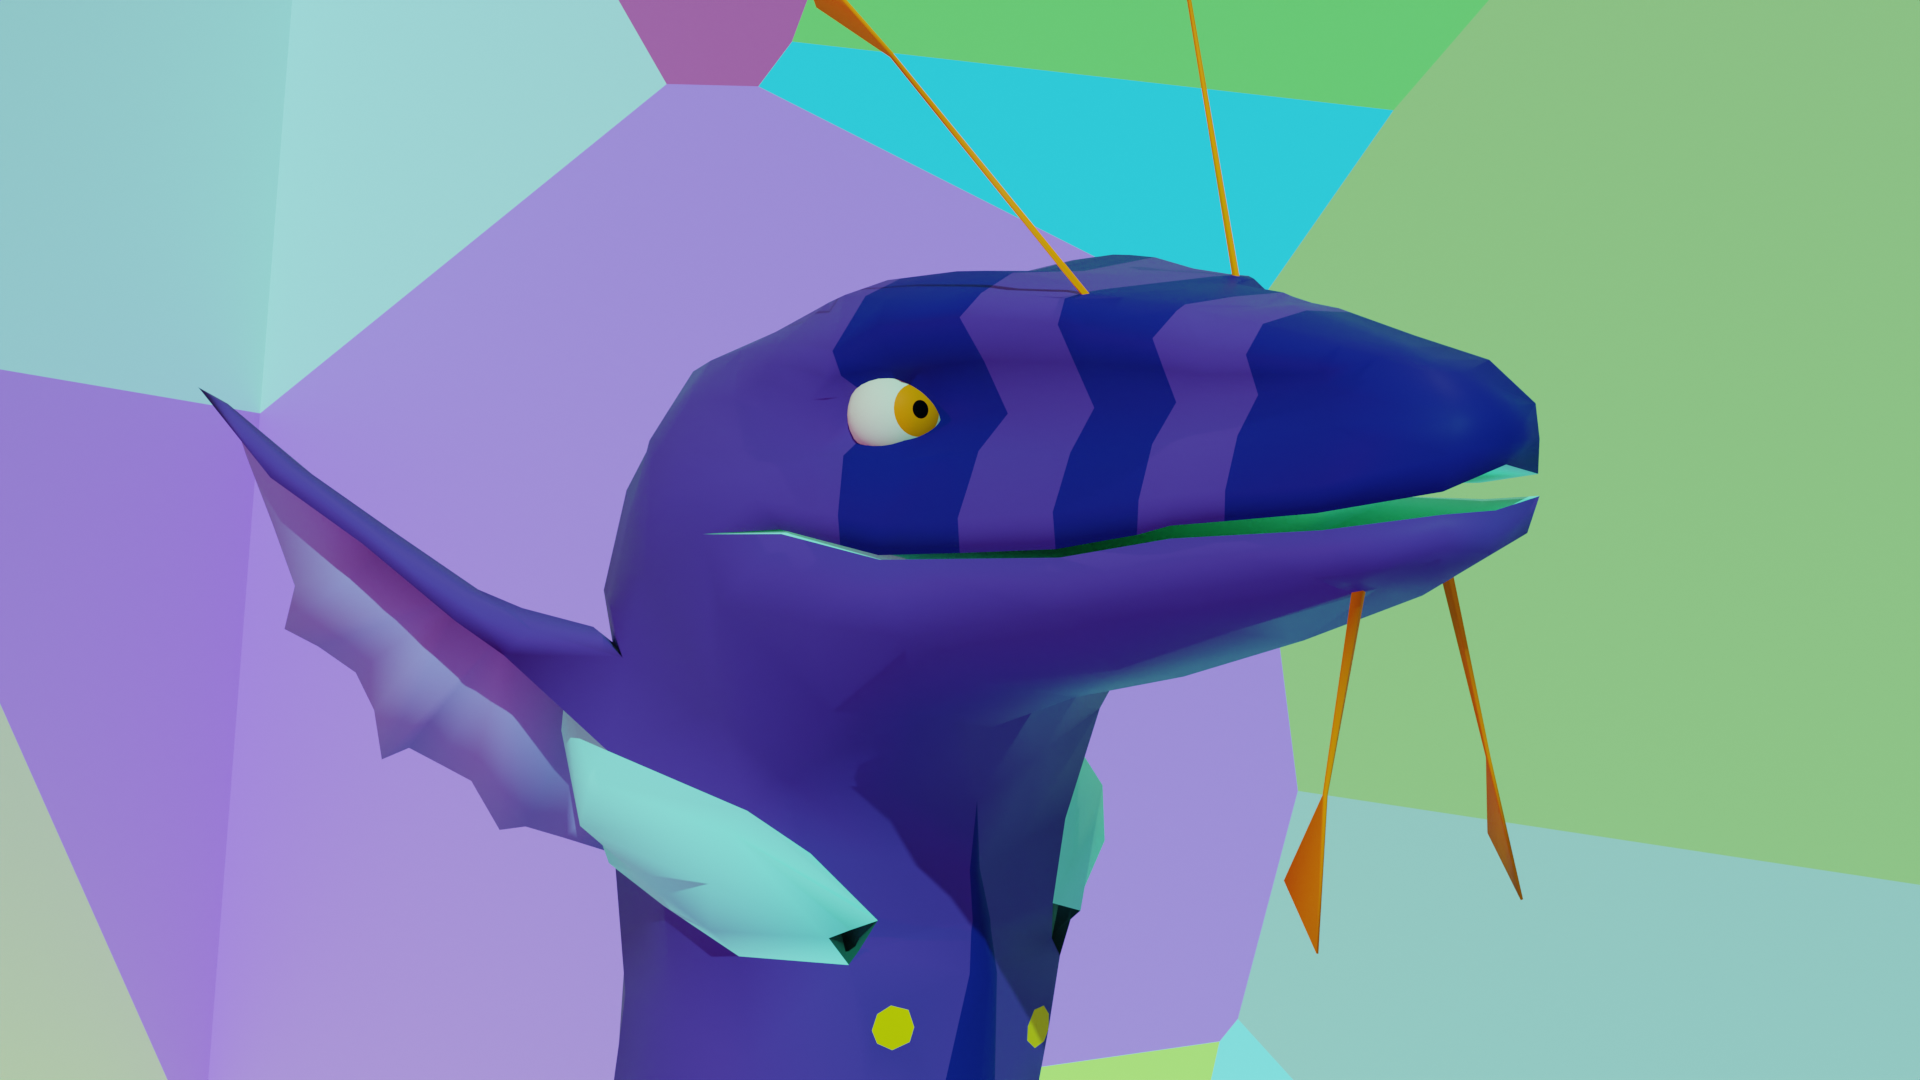 3D rendered headshot of a purple alien character on a pastel background.